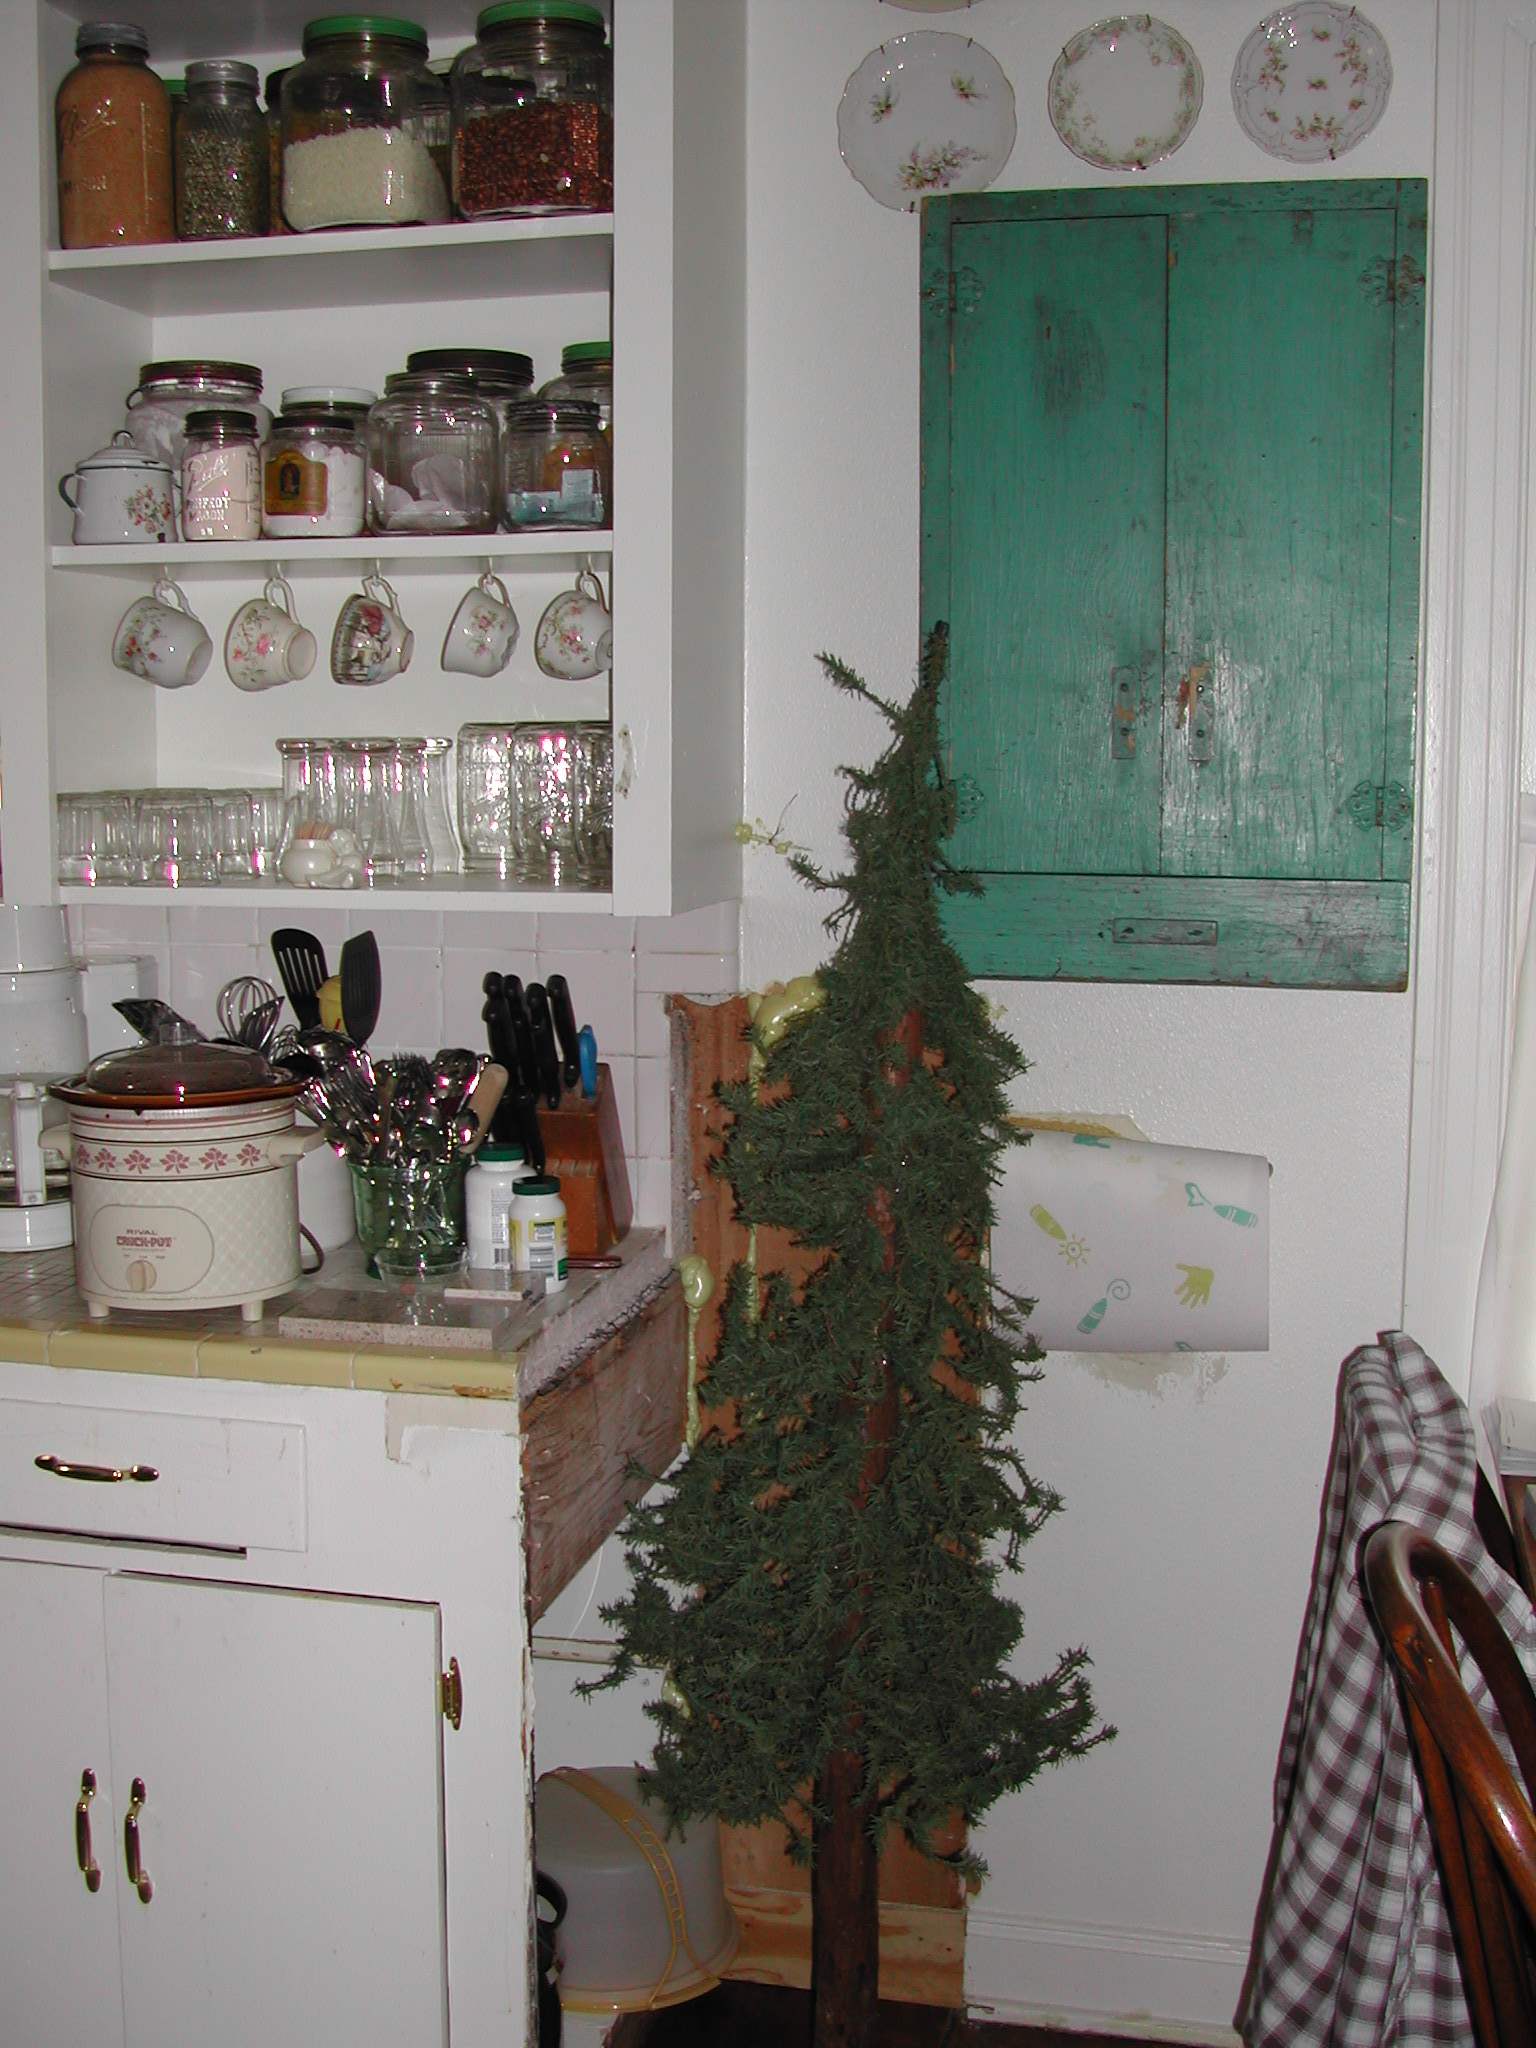 Ruth Avenue kitchen - before - Charlie Brown tree hiding terrible patch job